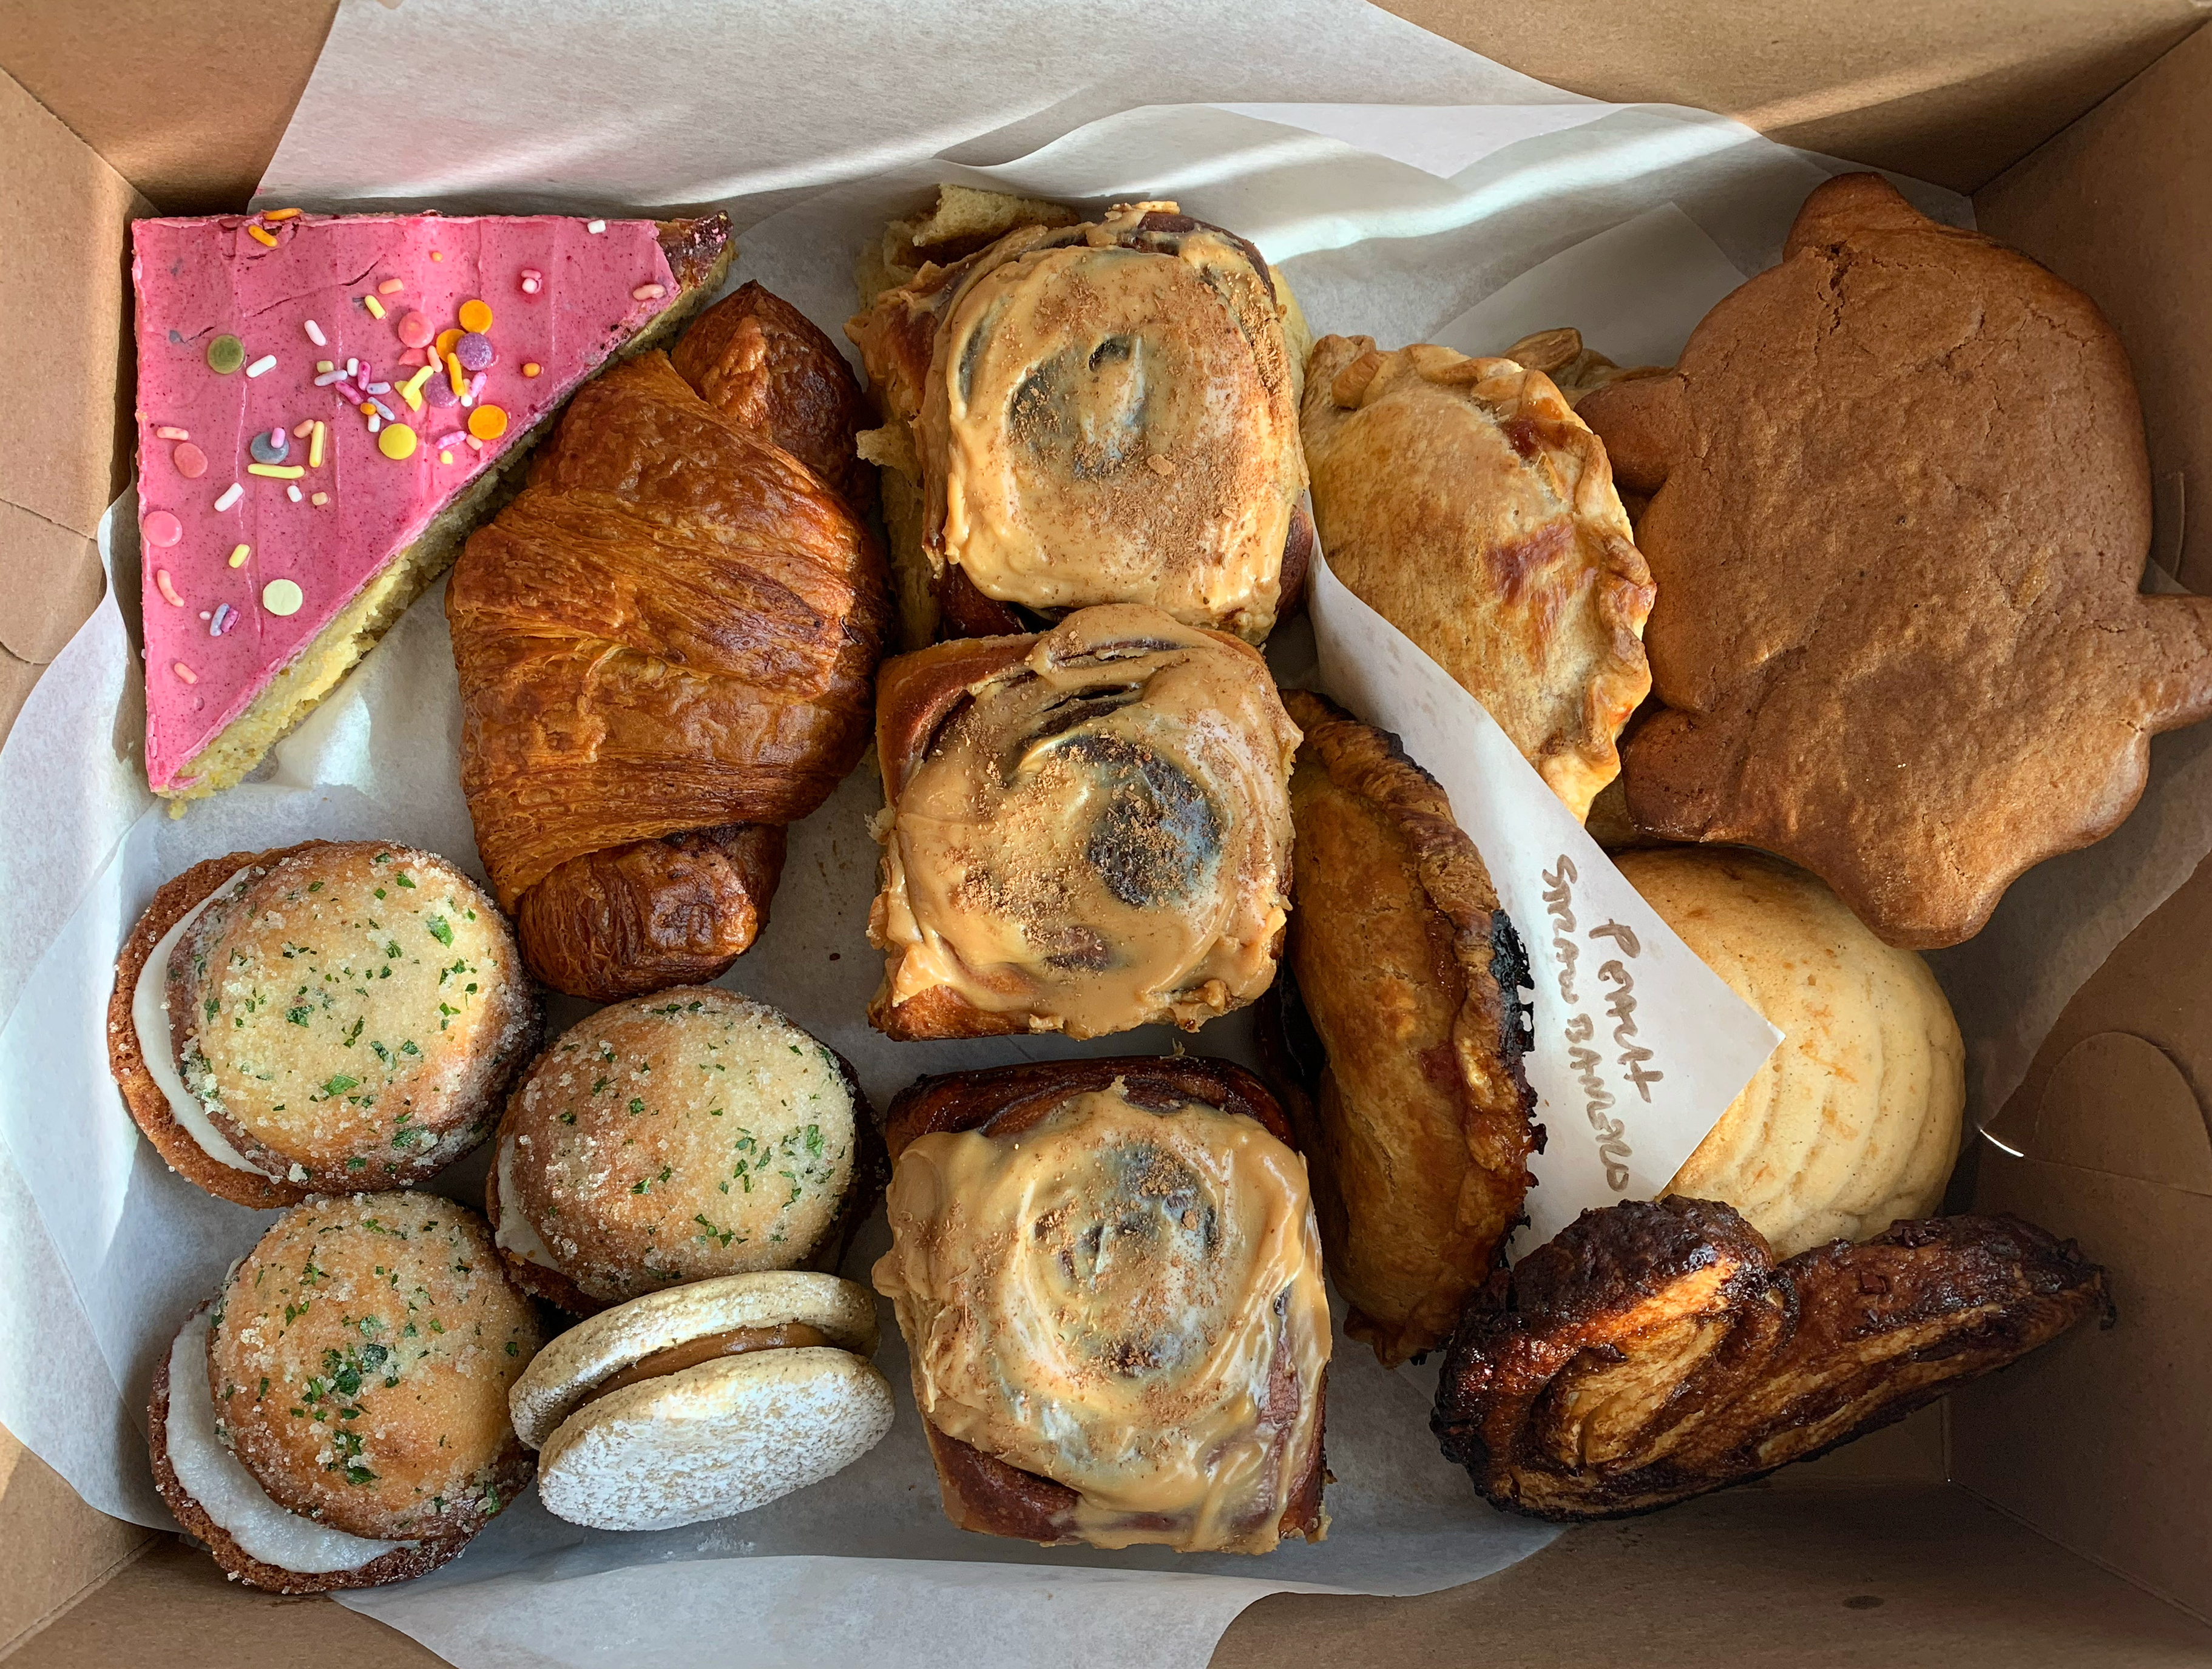 A box of baked goods from Comadre Panaderia  